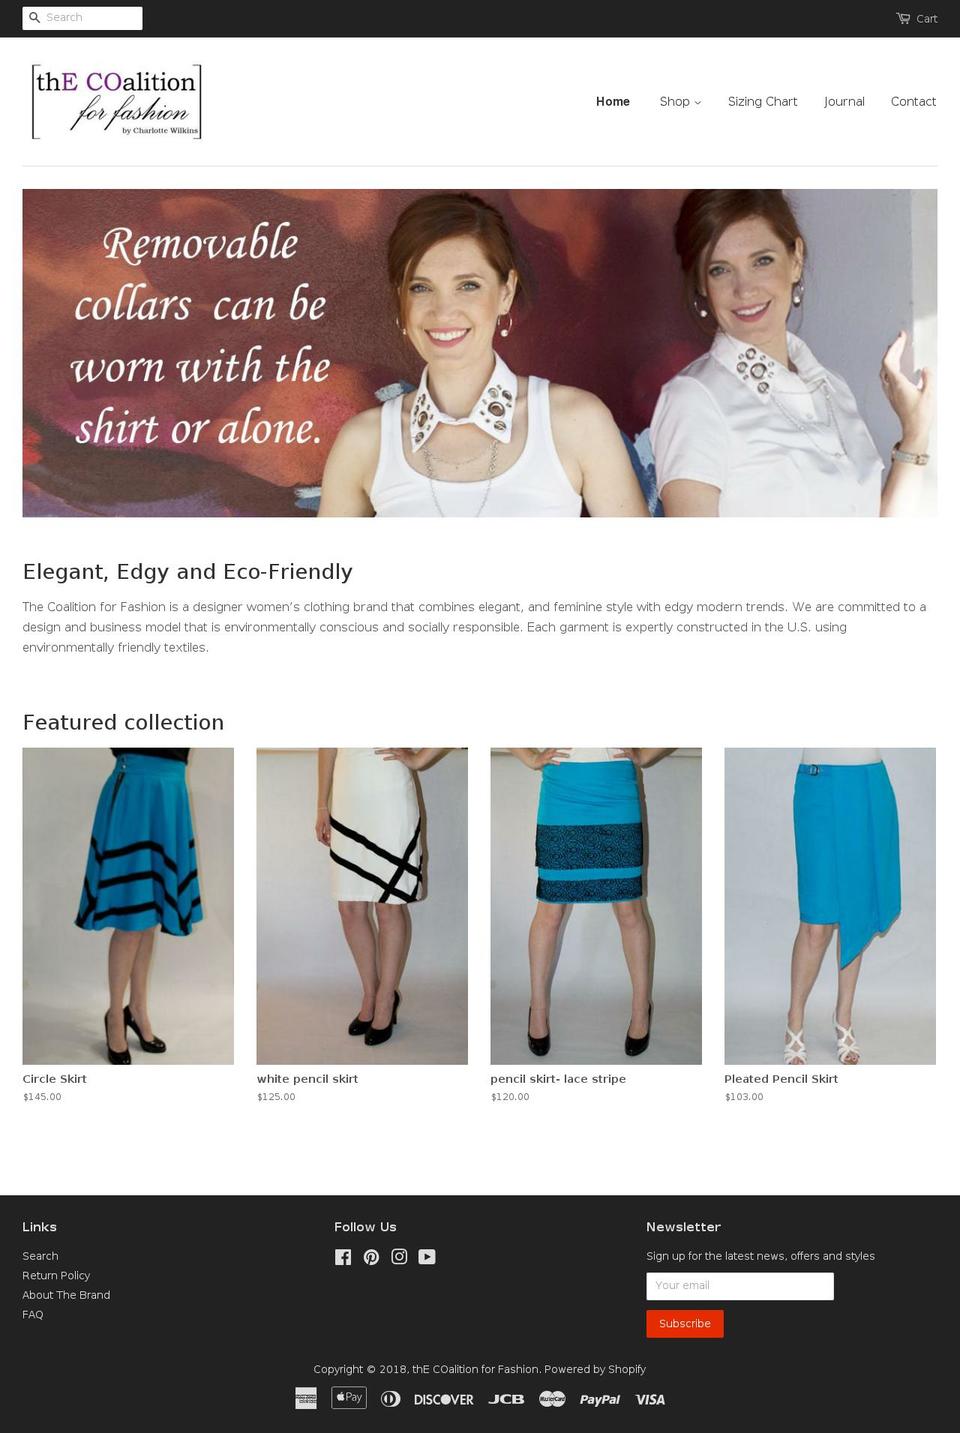 COLORBLOCK Shopify theme site example thecoalitionforfashion.com